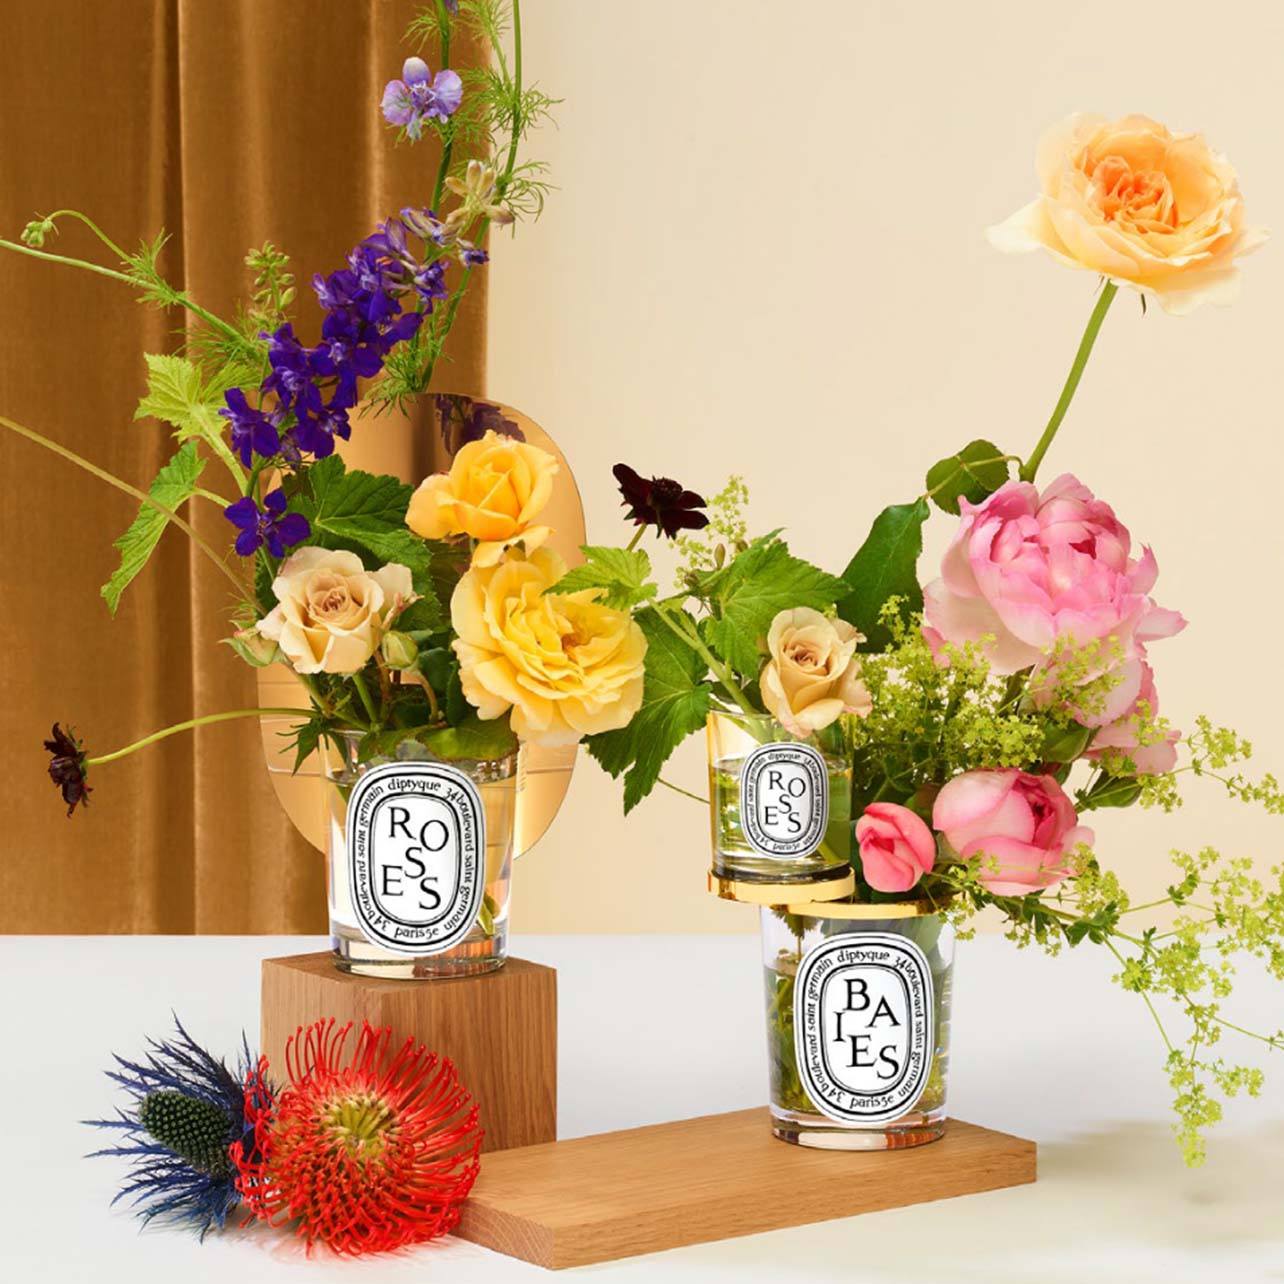 An assortment of Diptyque scents